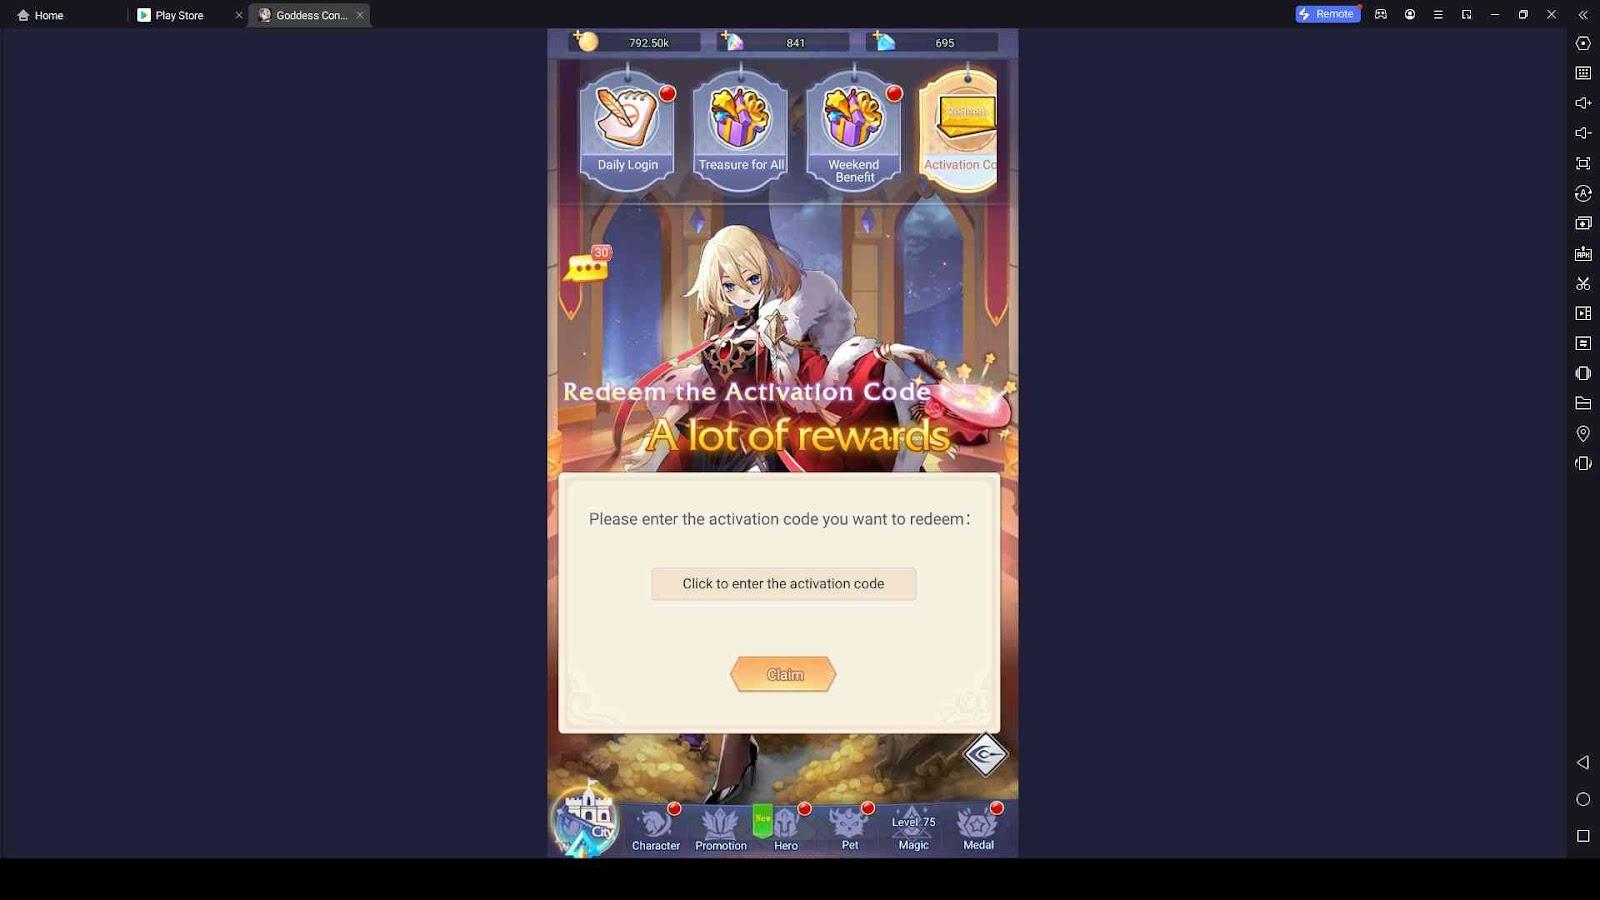 Redeeming Steps for Codes in Goddess Connect